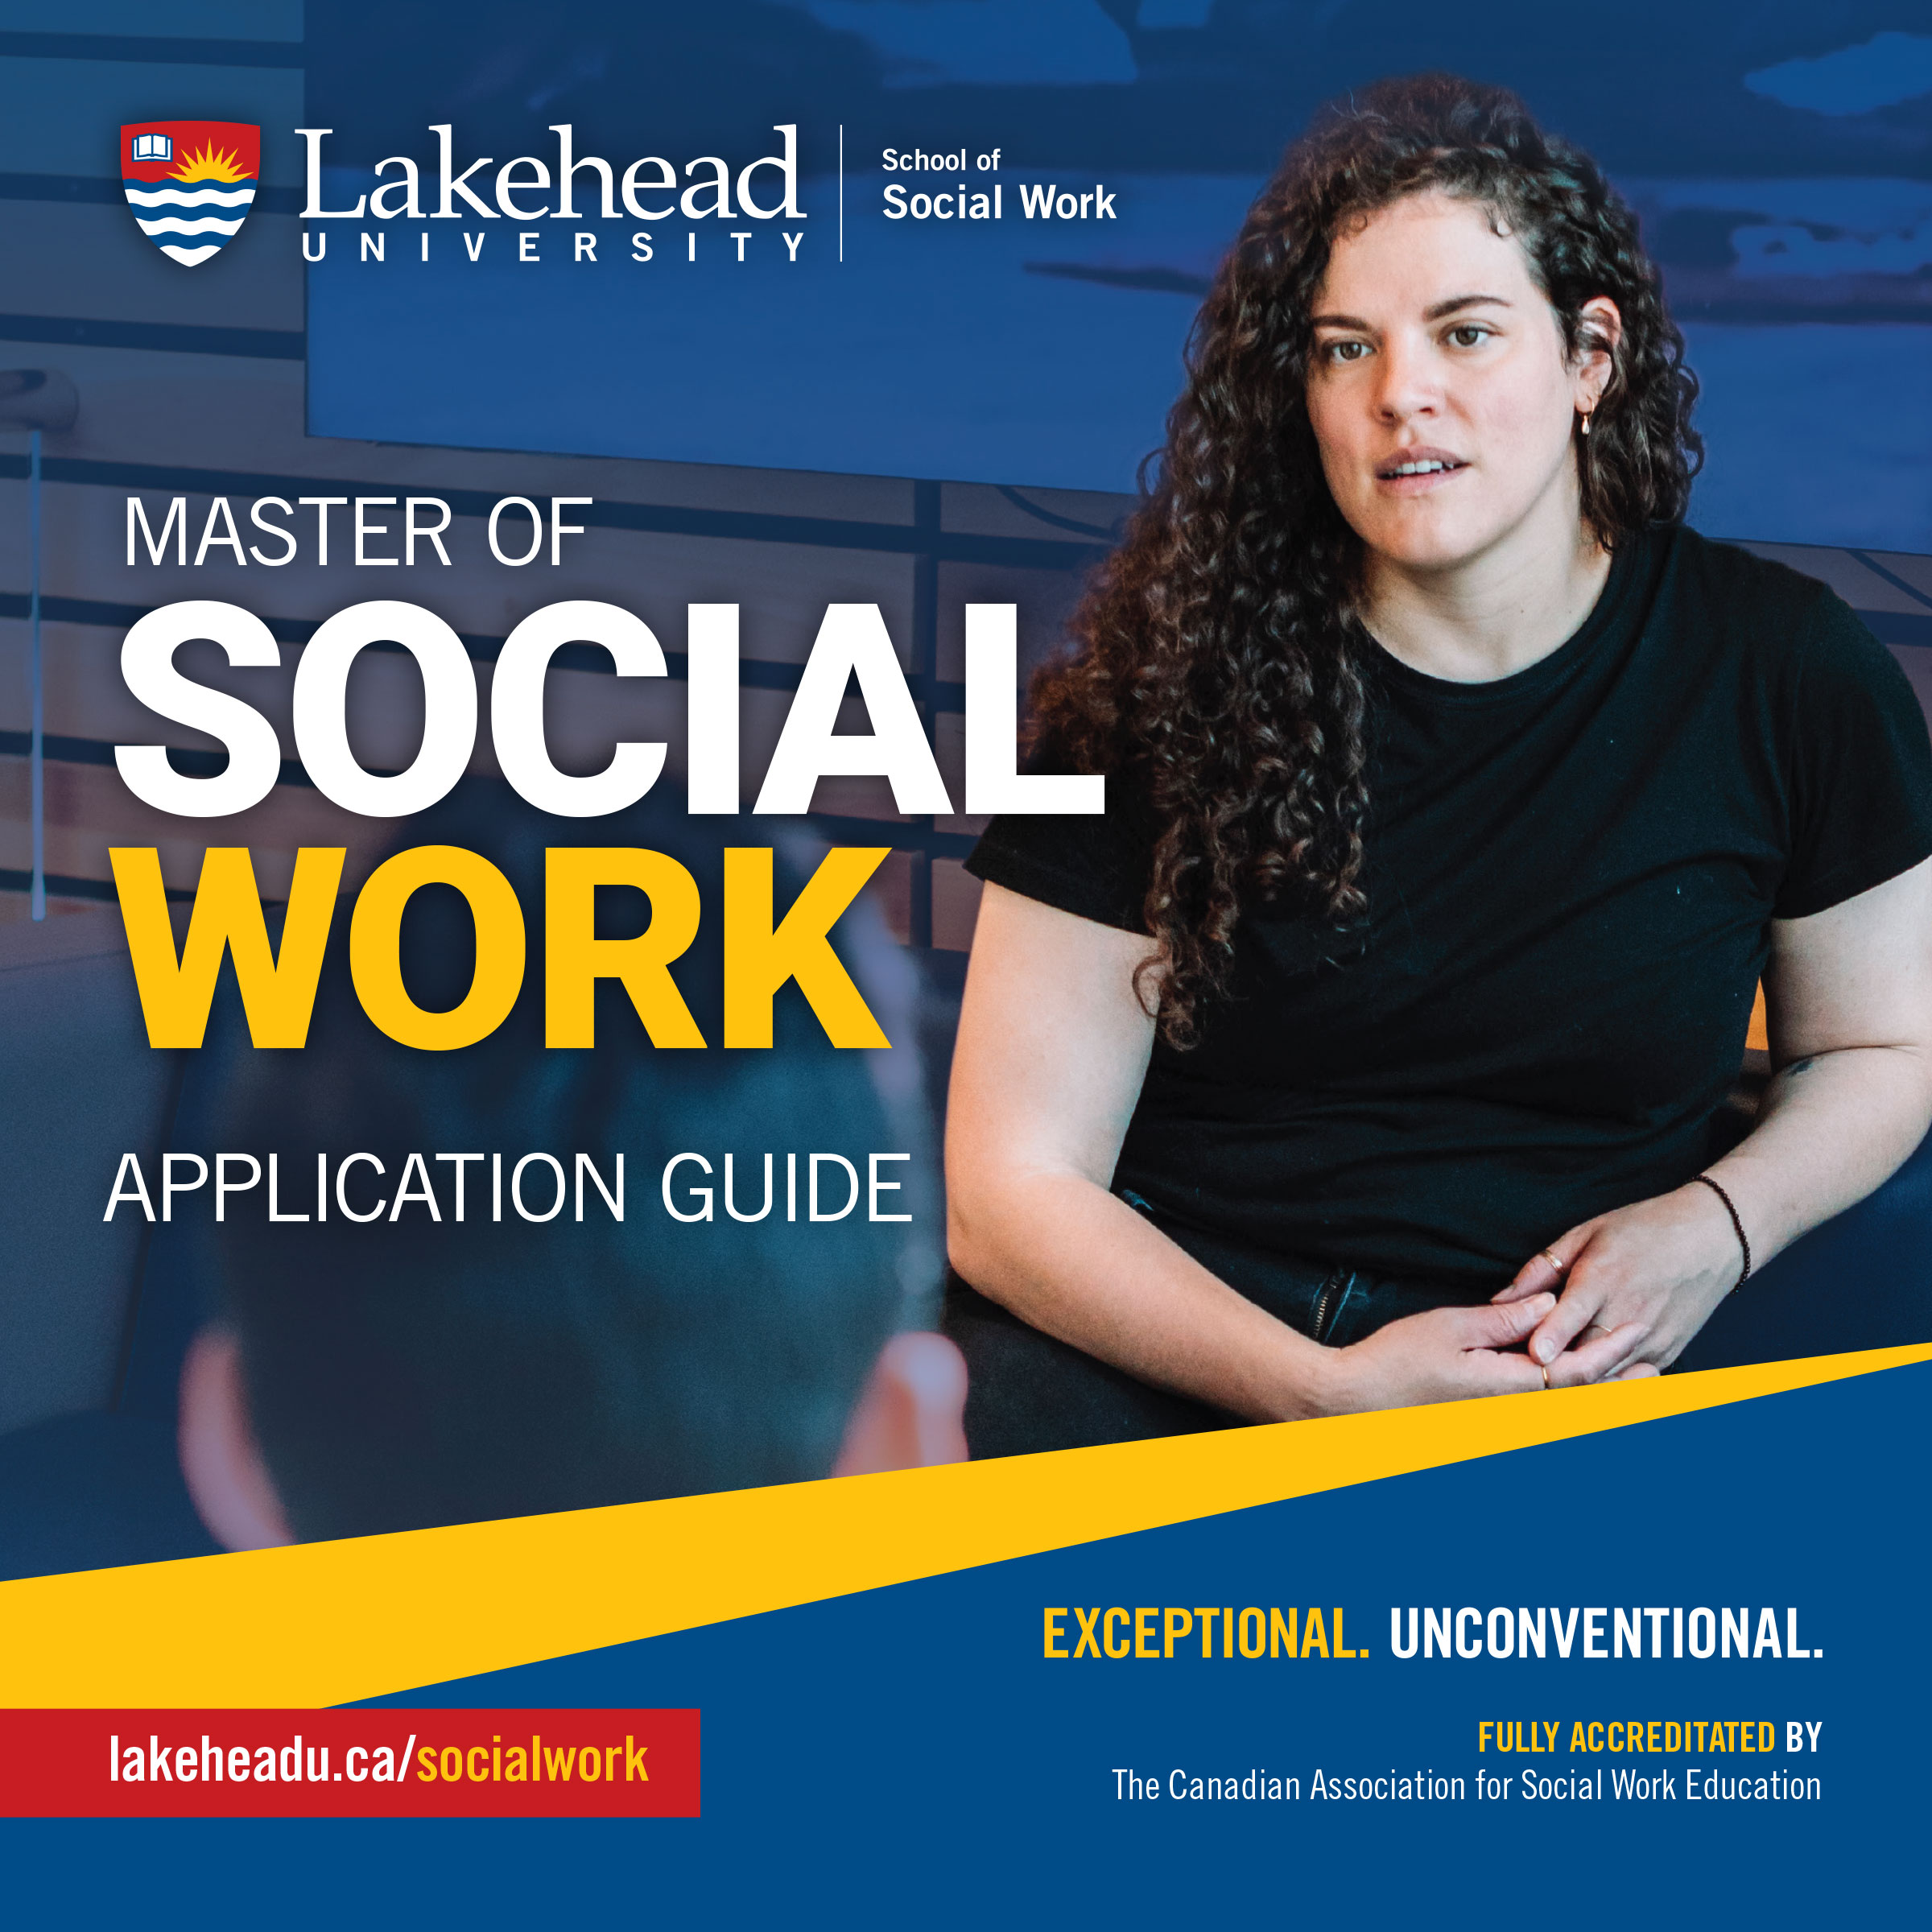 Read the Master of Social Work Application Guide